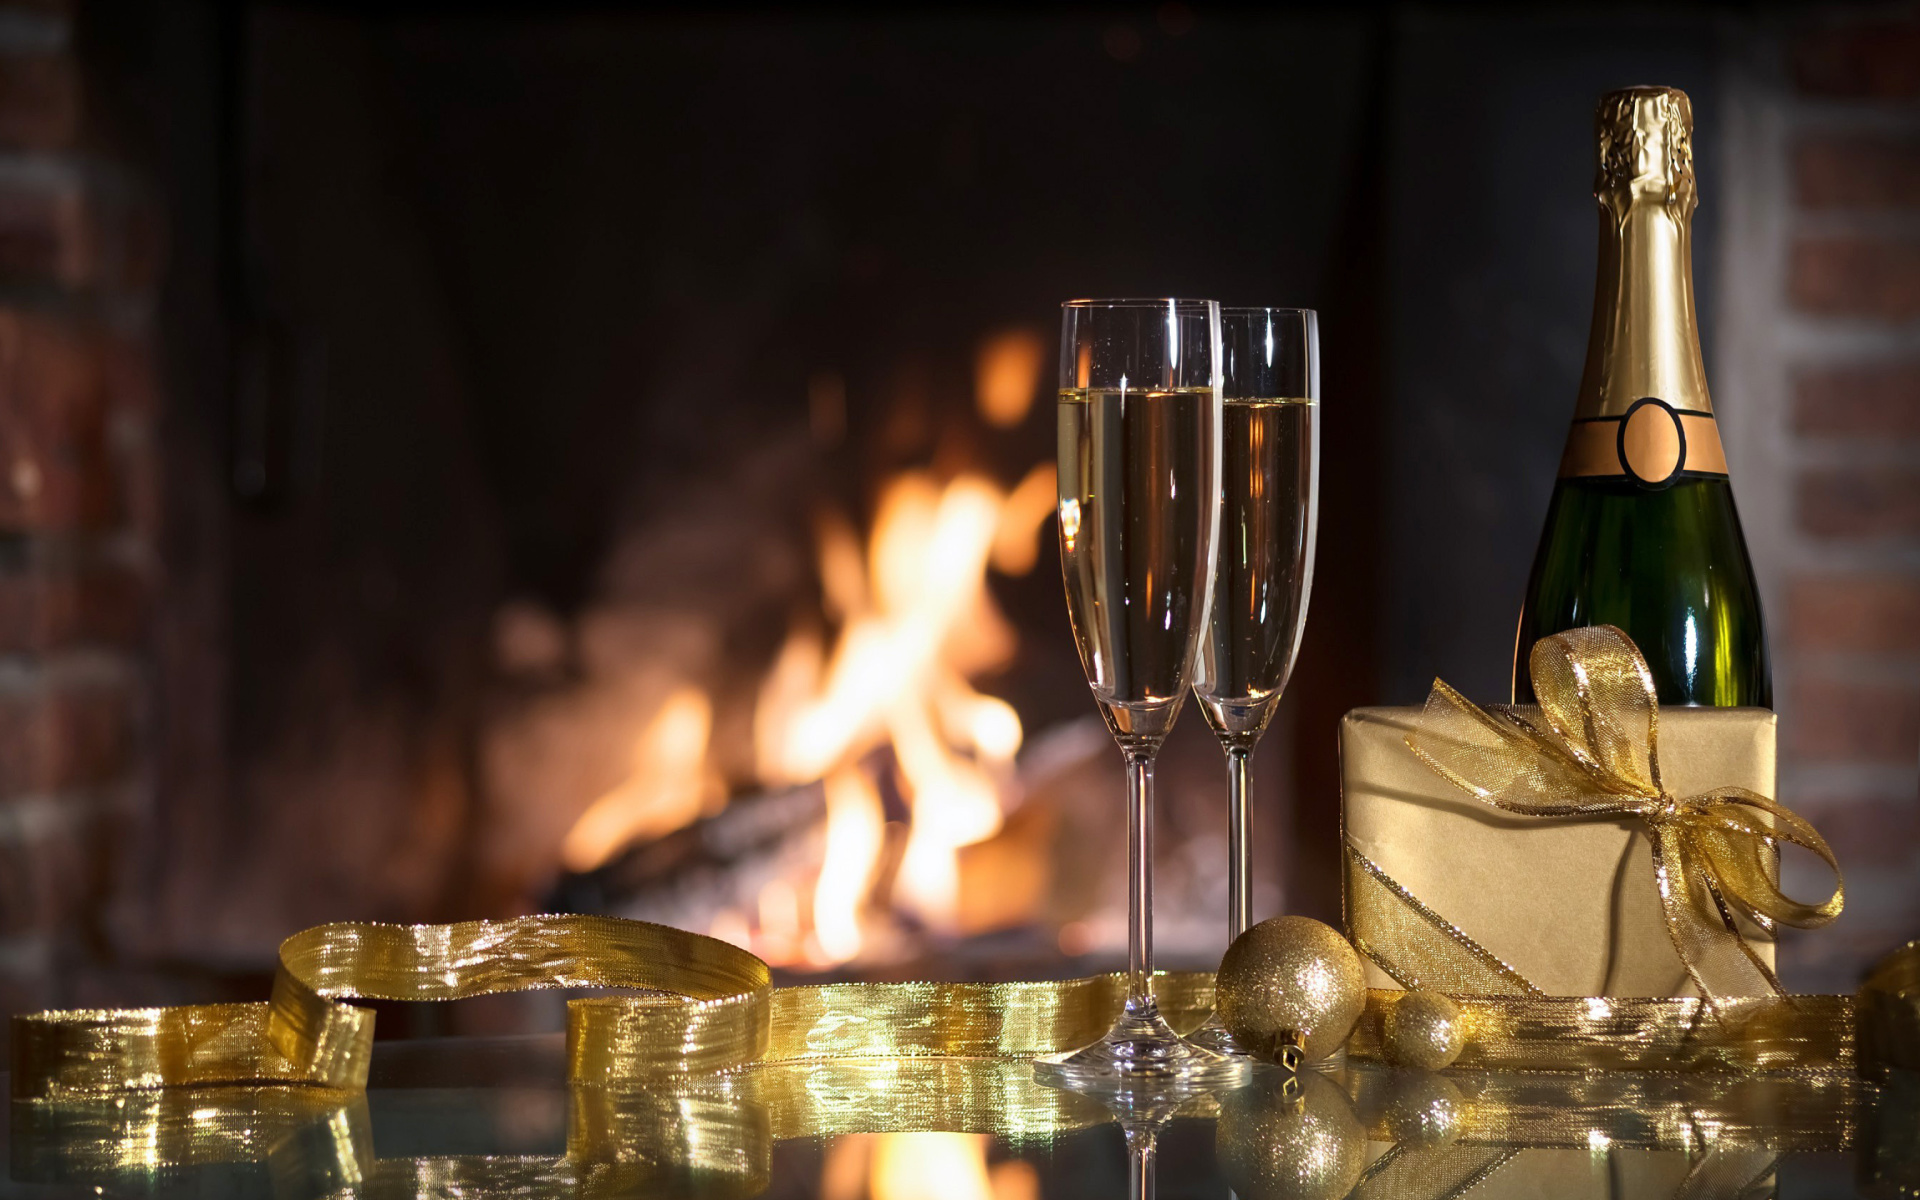 Champagne and Fireplace wallpaper 1920x1200